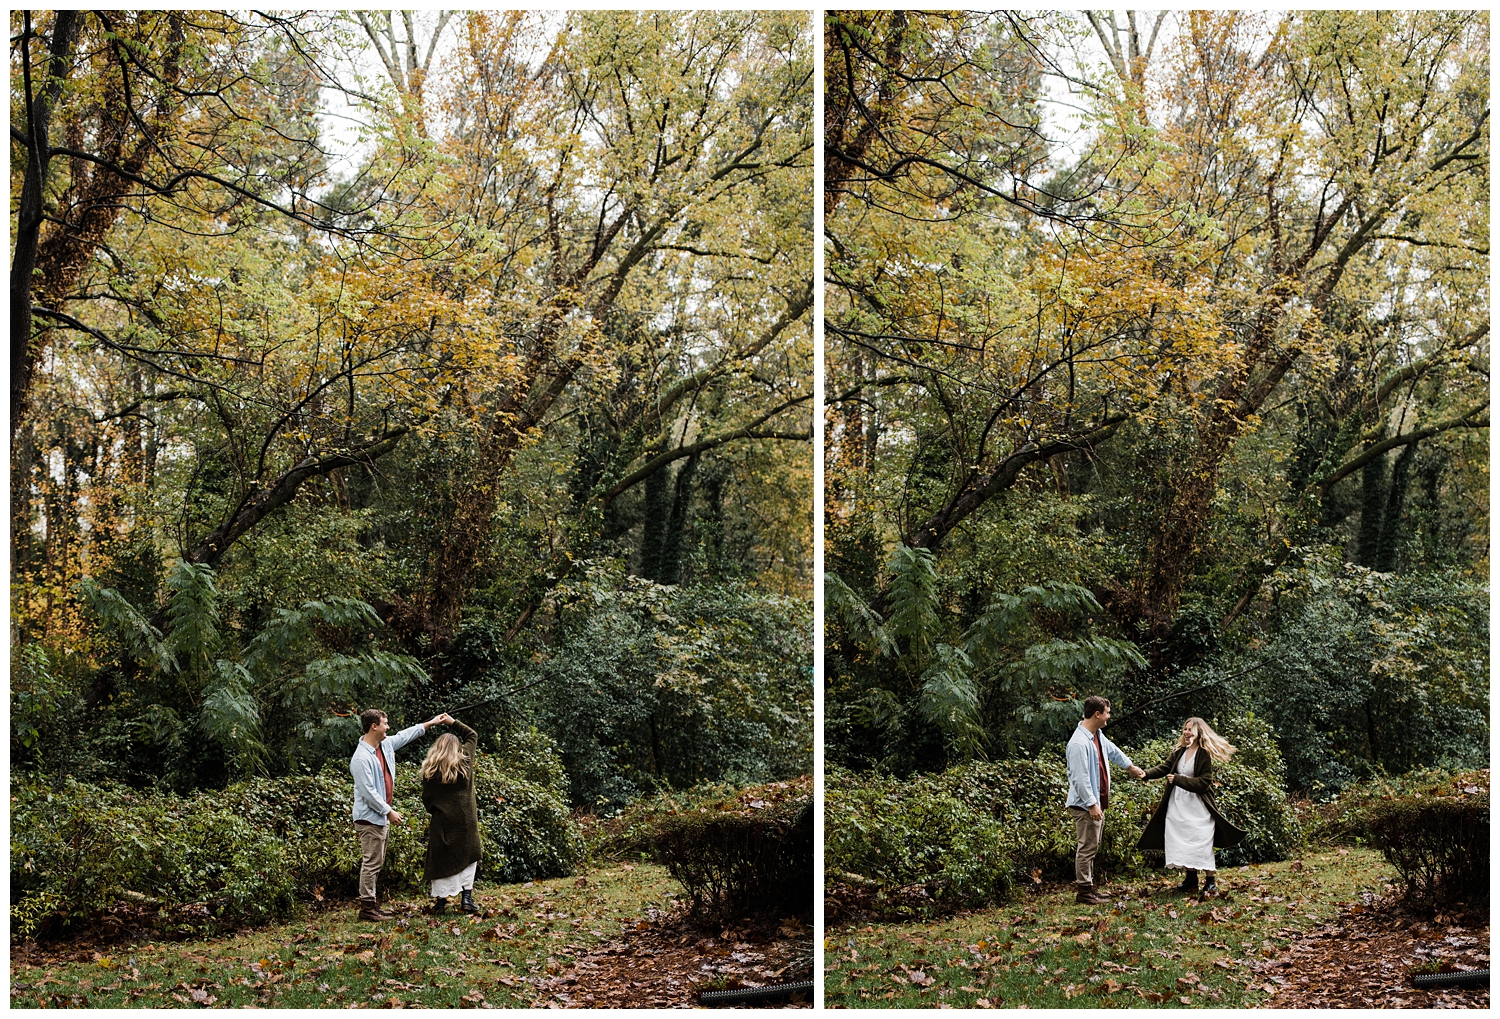 Rainy Day Engagement Session in Marietta, Georgia with cute couple dancing in the rain